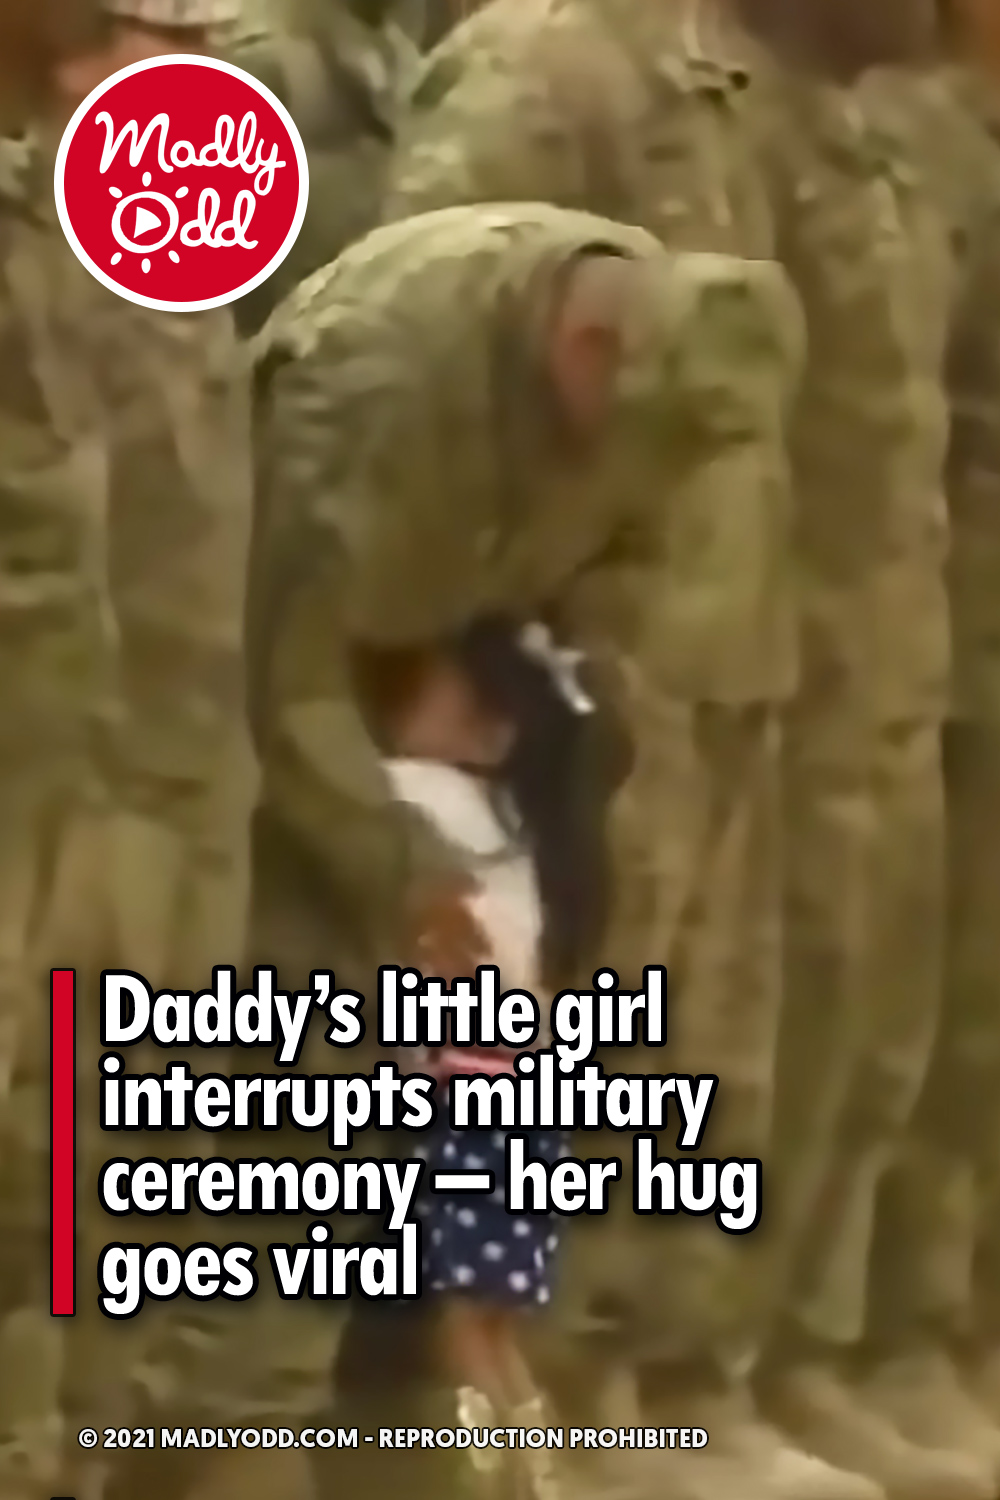 Daddy’s little girl interrupts military ceremony – her hug goes viral